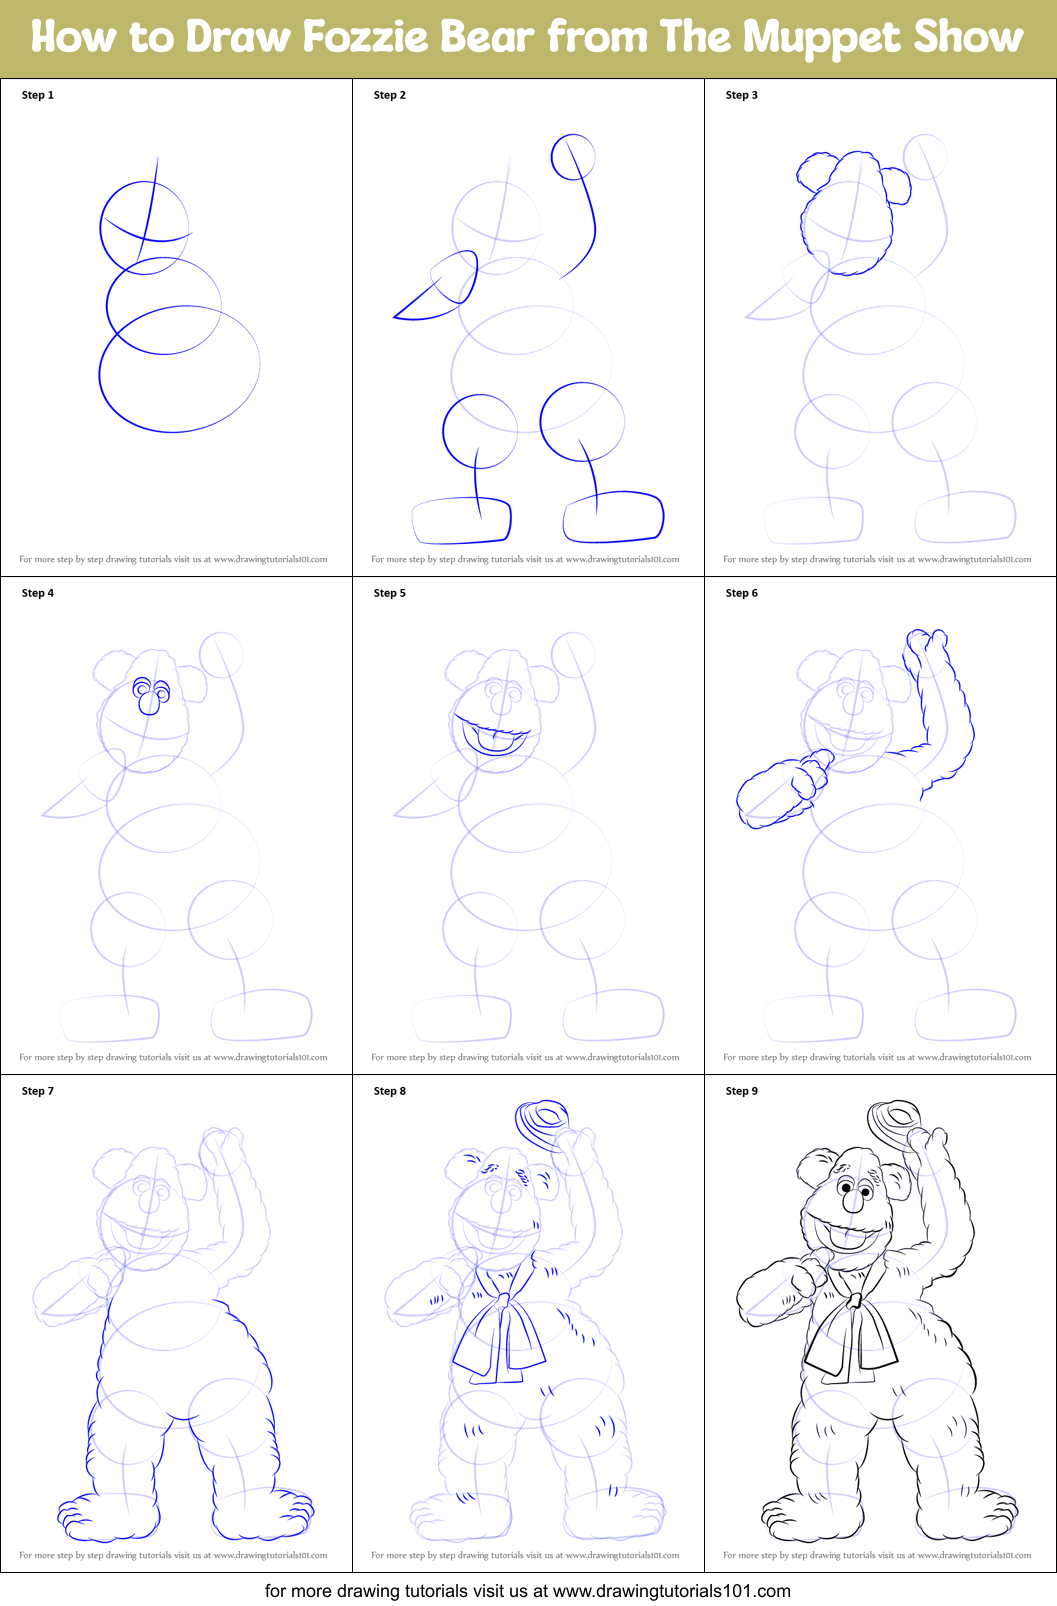 How to Draw Fozzie Bear from The Muppet Show printable step by step